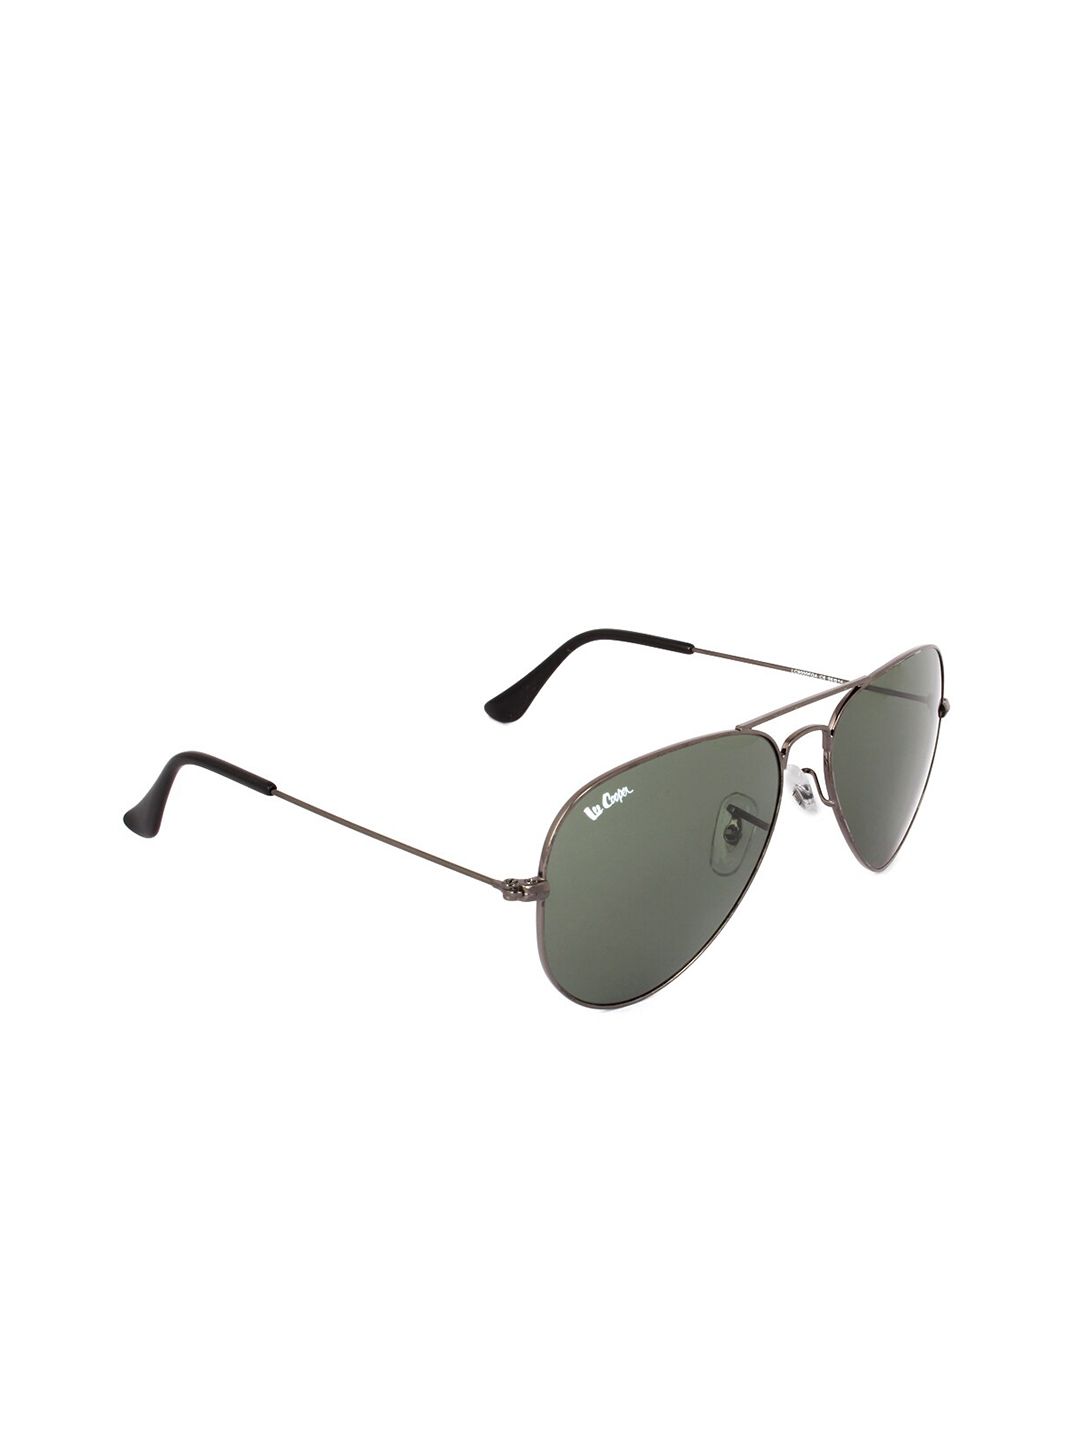 Lee Cooper Grey Lens Aviator Sunglasses with UV Protected Lens LCO9000FOA C8 Price in India